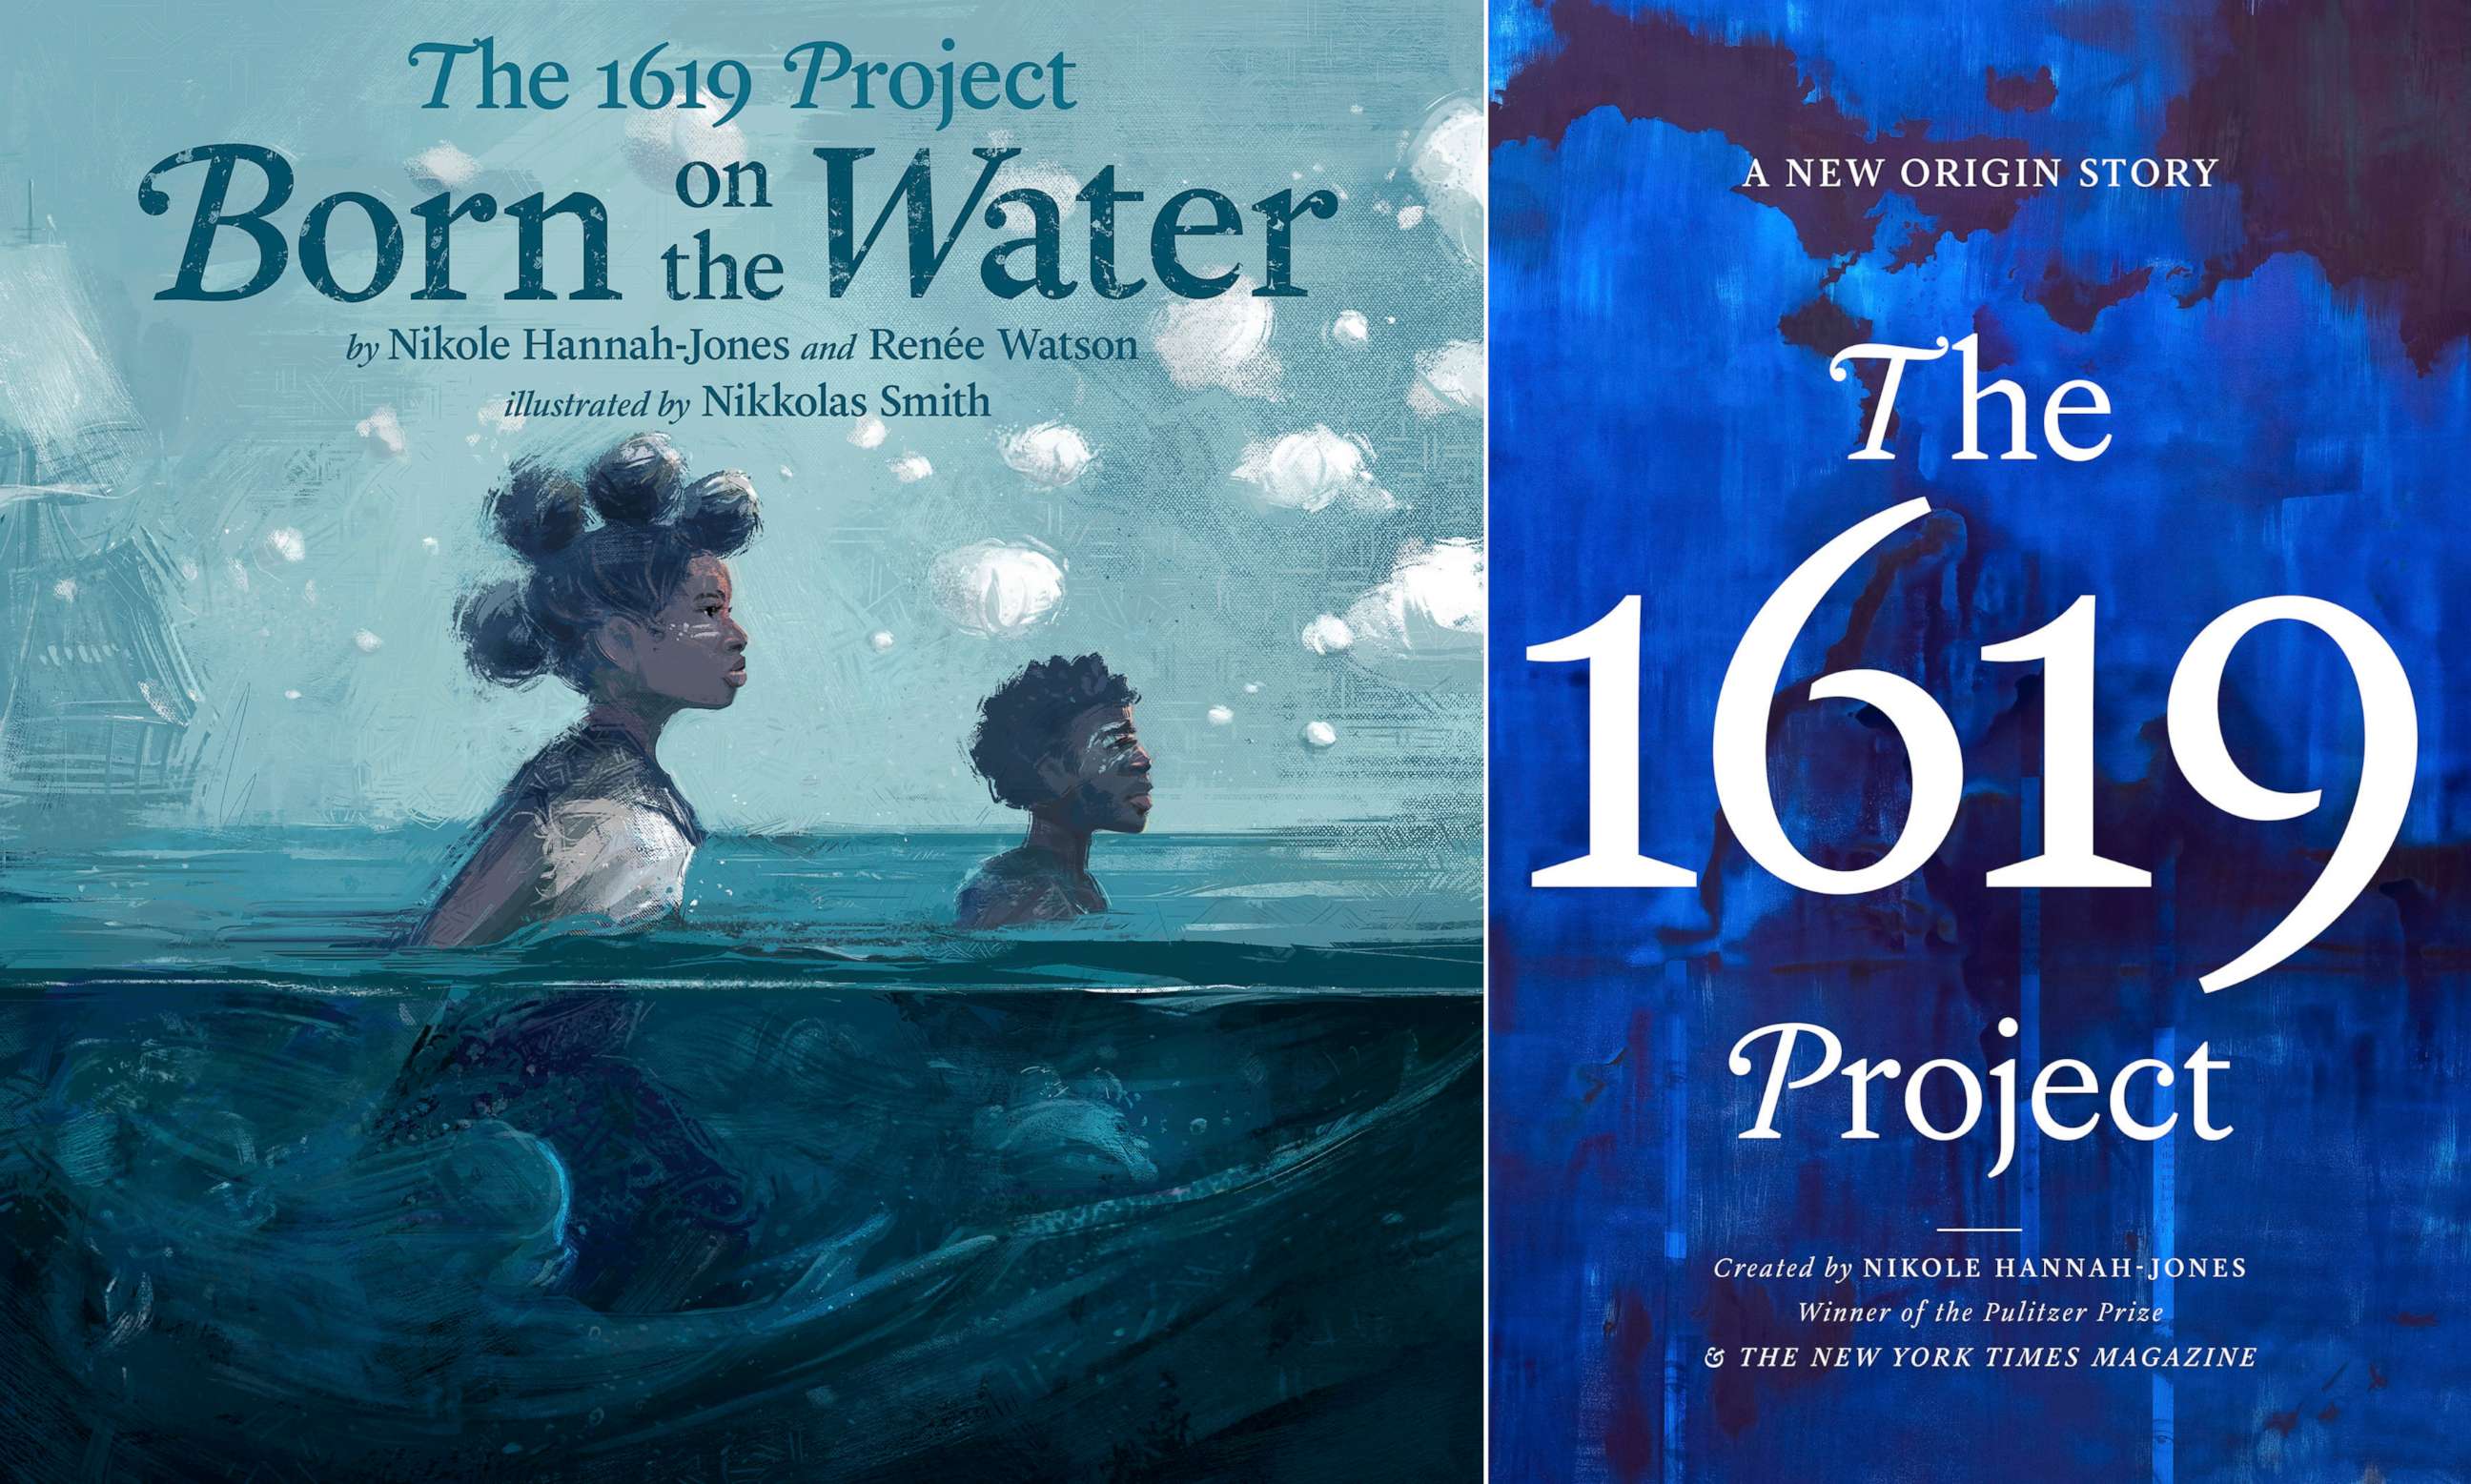 PHOTO: The cover art for "The 1619 Project: Born On the Water" based on a student's family tree assignment, with words by Hannah-Jones and Renee Watson and illustrations by Nikkolas Smith, left, and "The 1619 Project: A New Origin Story".